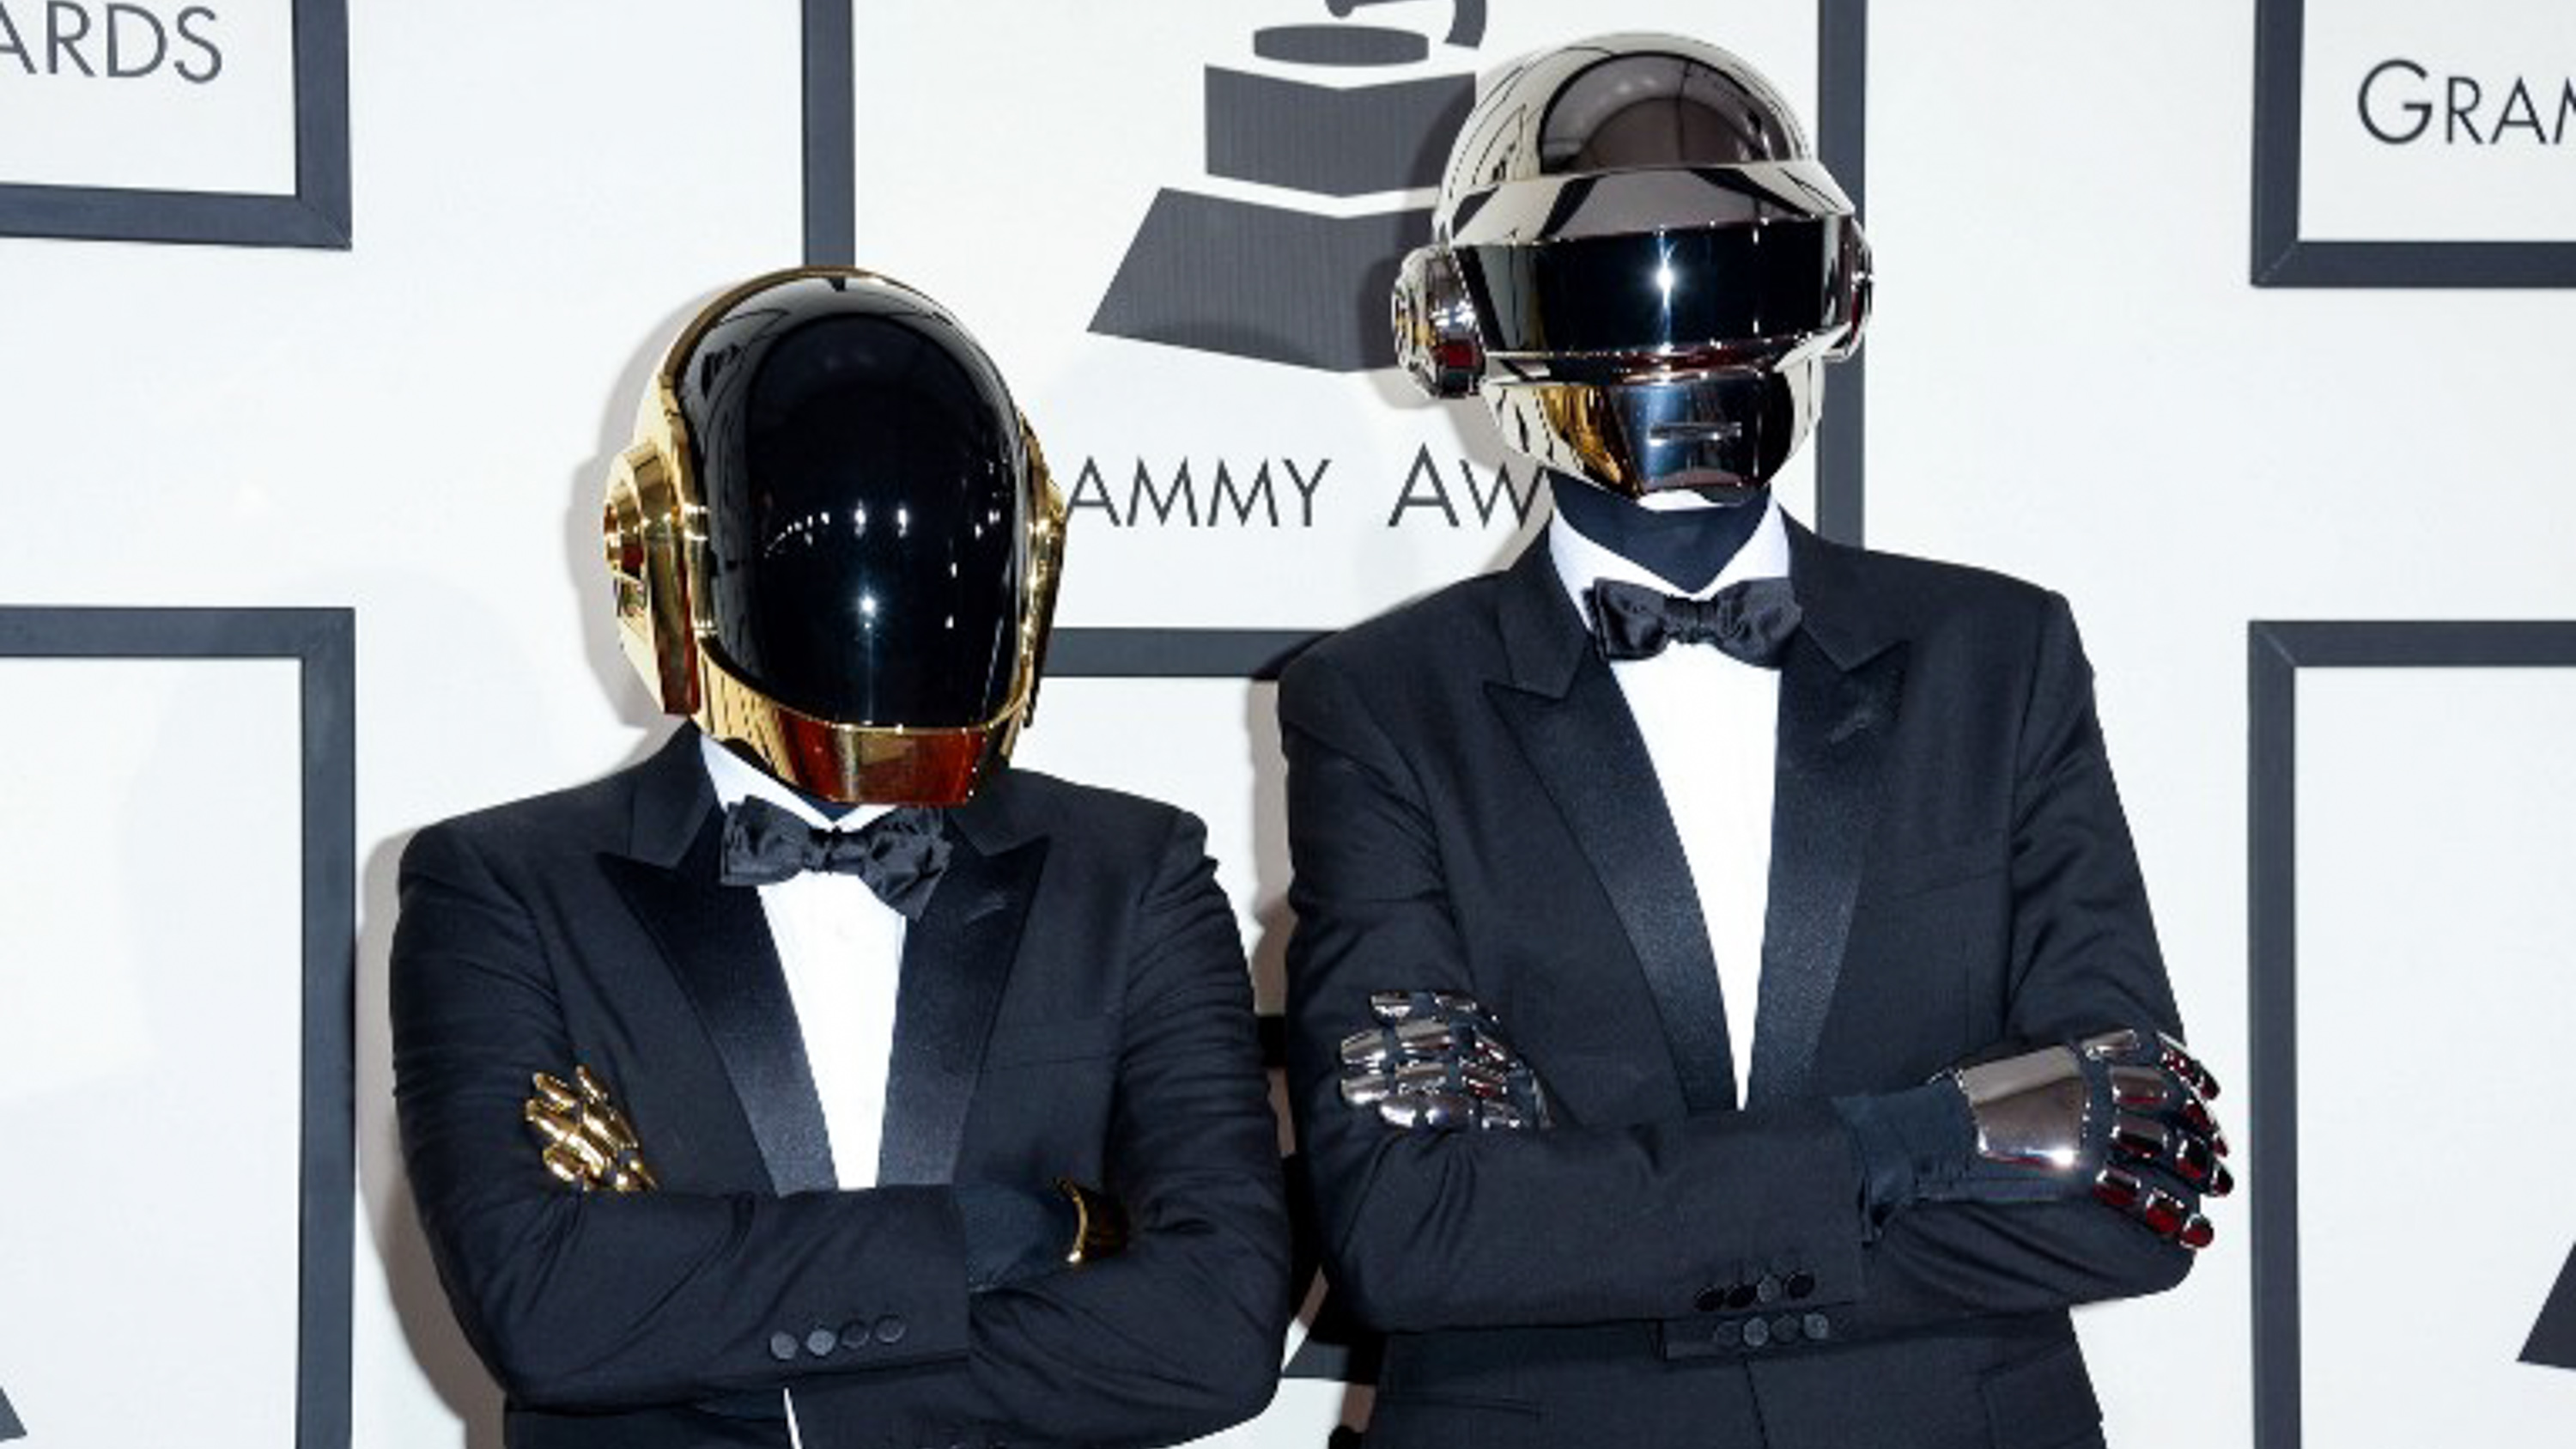 Daft Punk to play Grammys in first performance in years